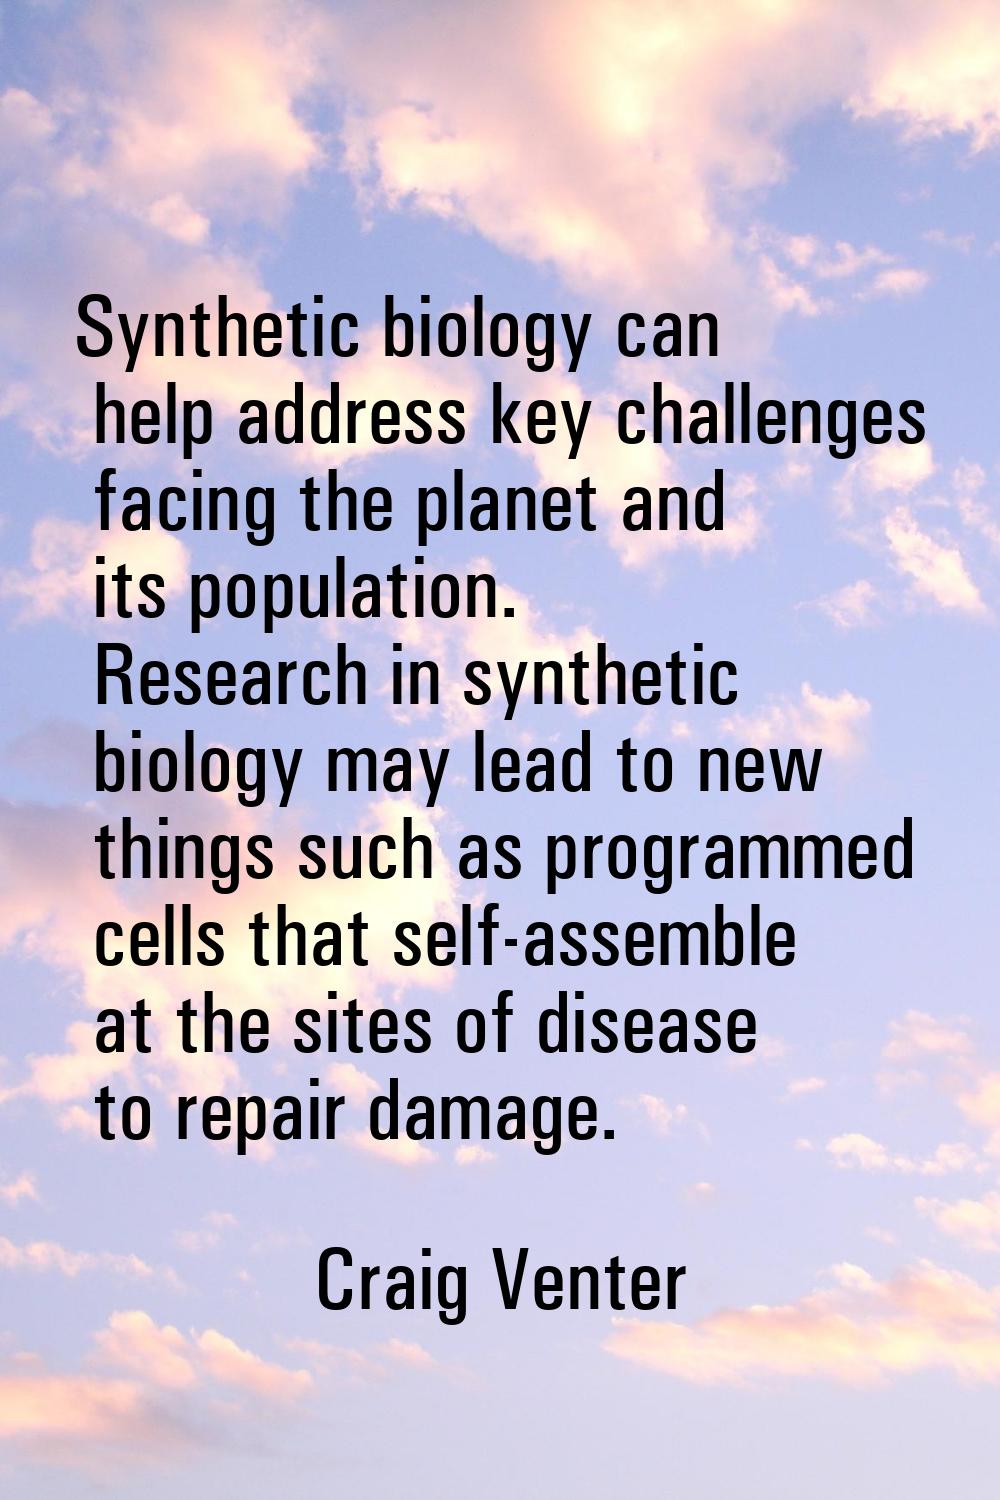 Synthetic biology can help address key challenges facing the planet and its population. Research in